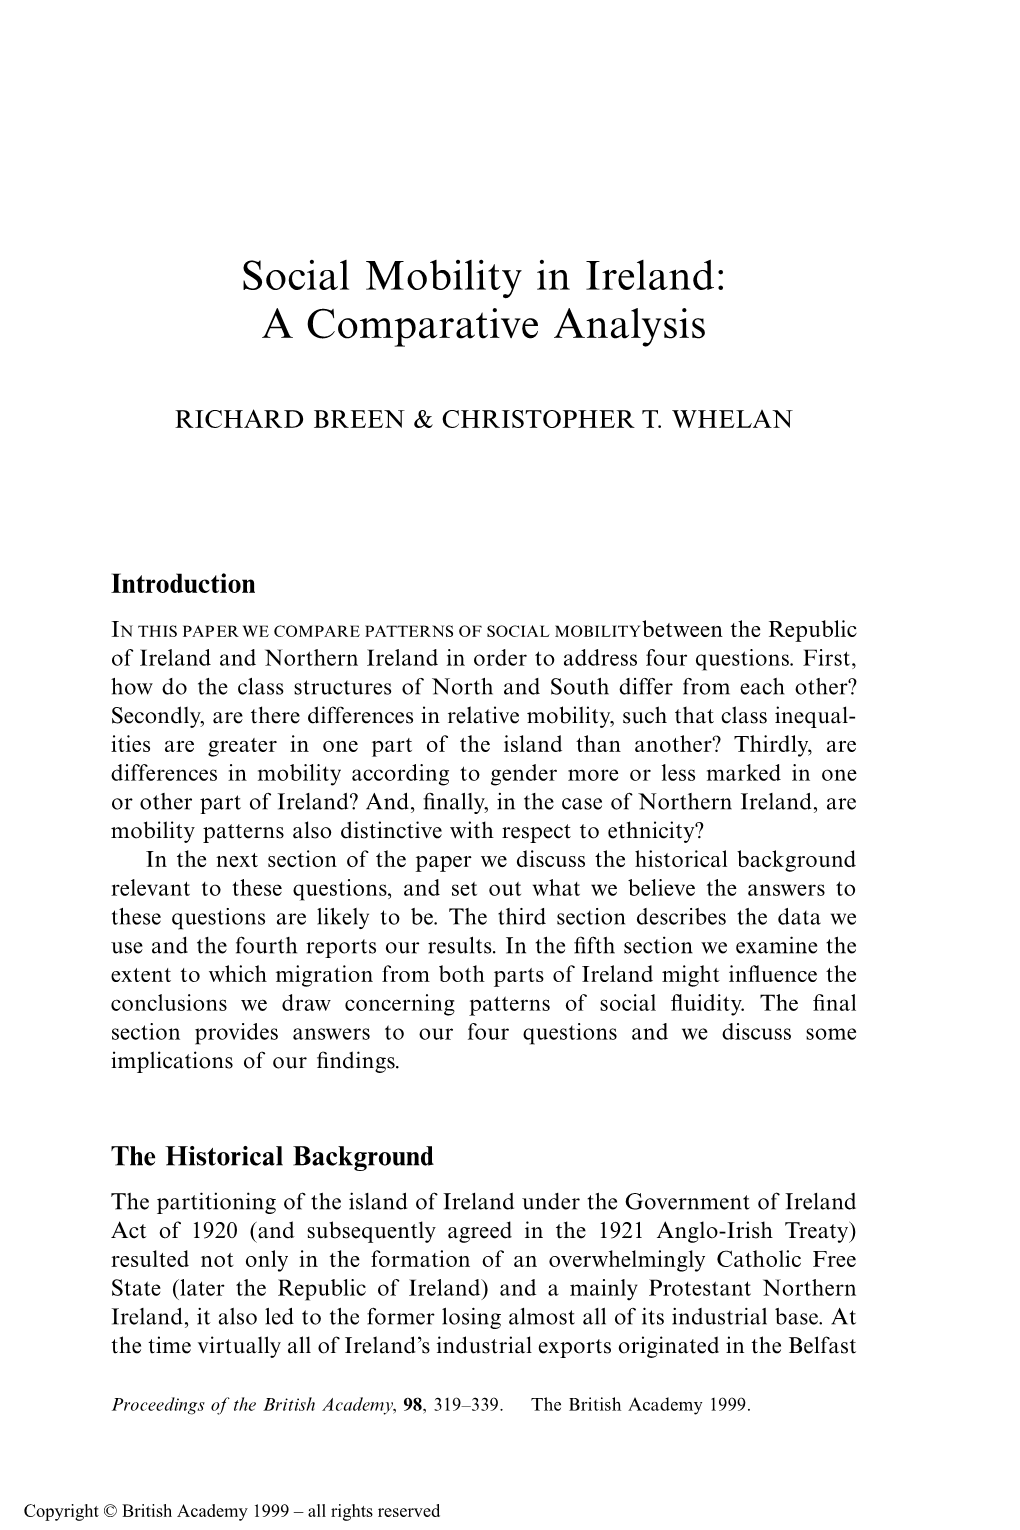 Social Mobility in Ireland: a Comparative Analysis